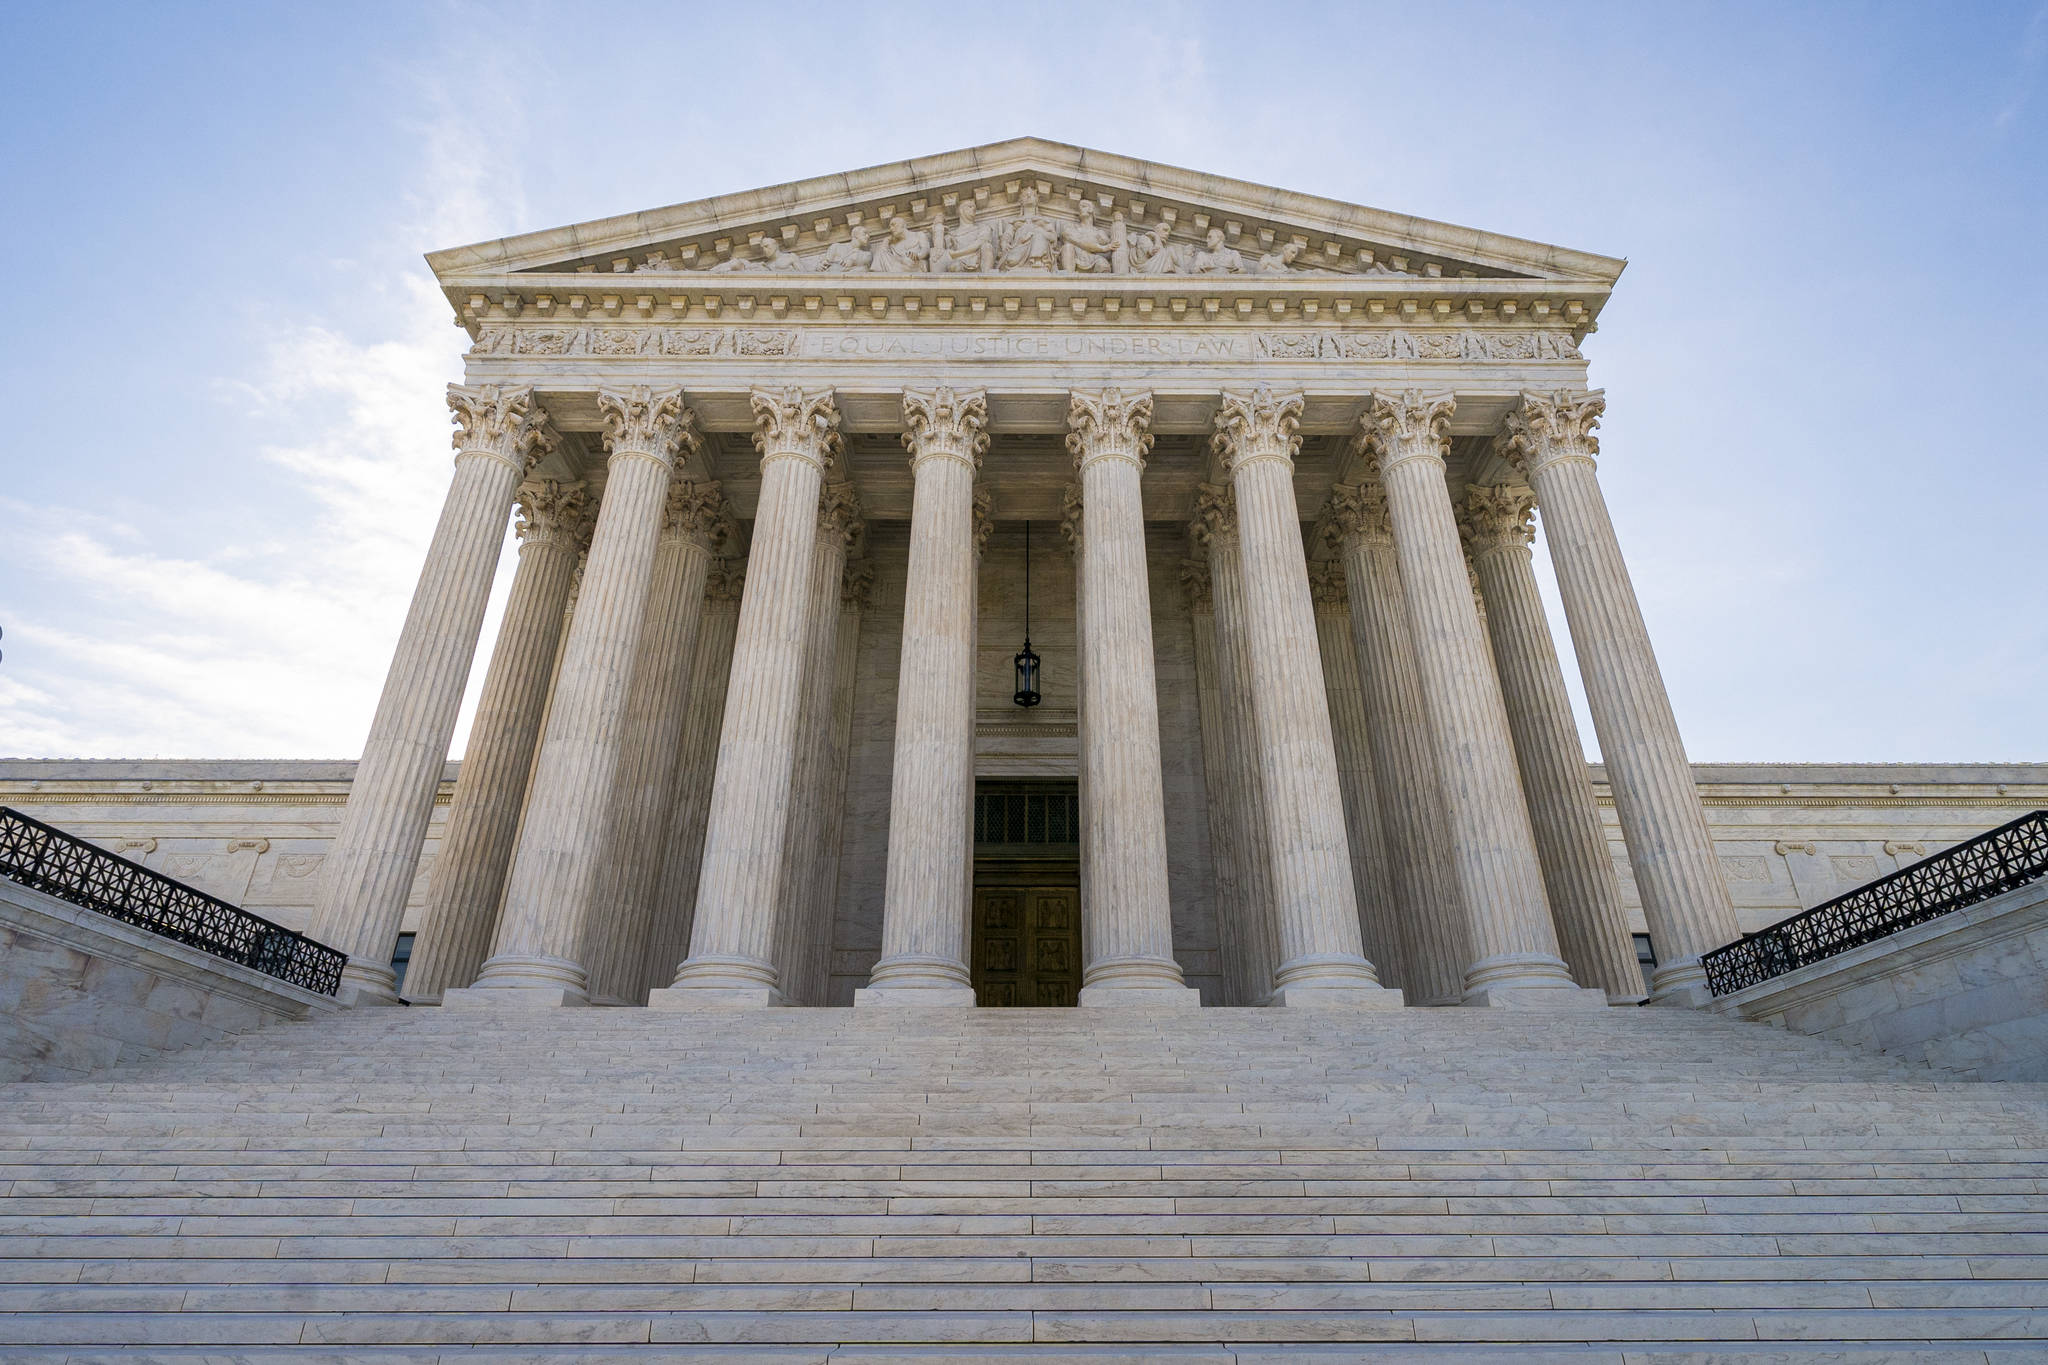 The Supreme Court building is seen in Washington on June 17. (J. Scott Applewhite/The Associated Press)